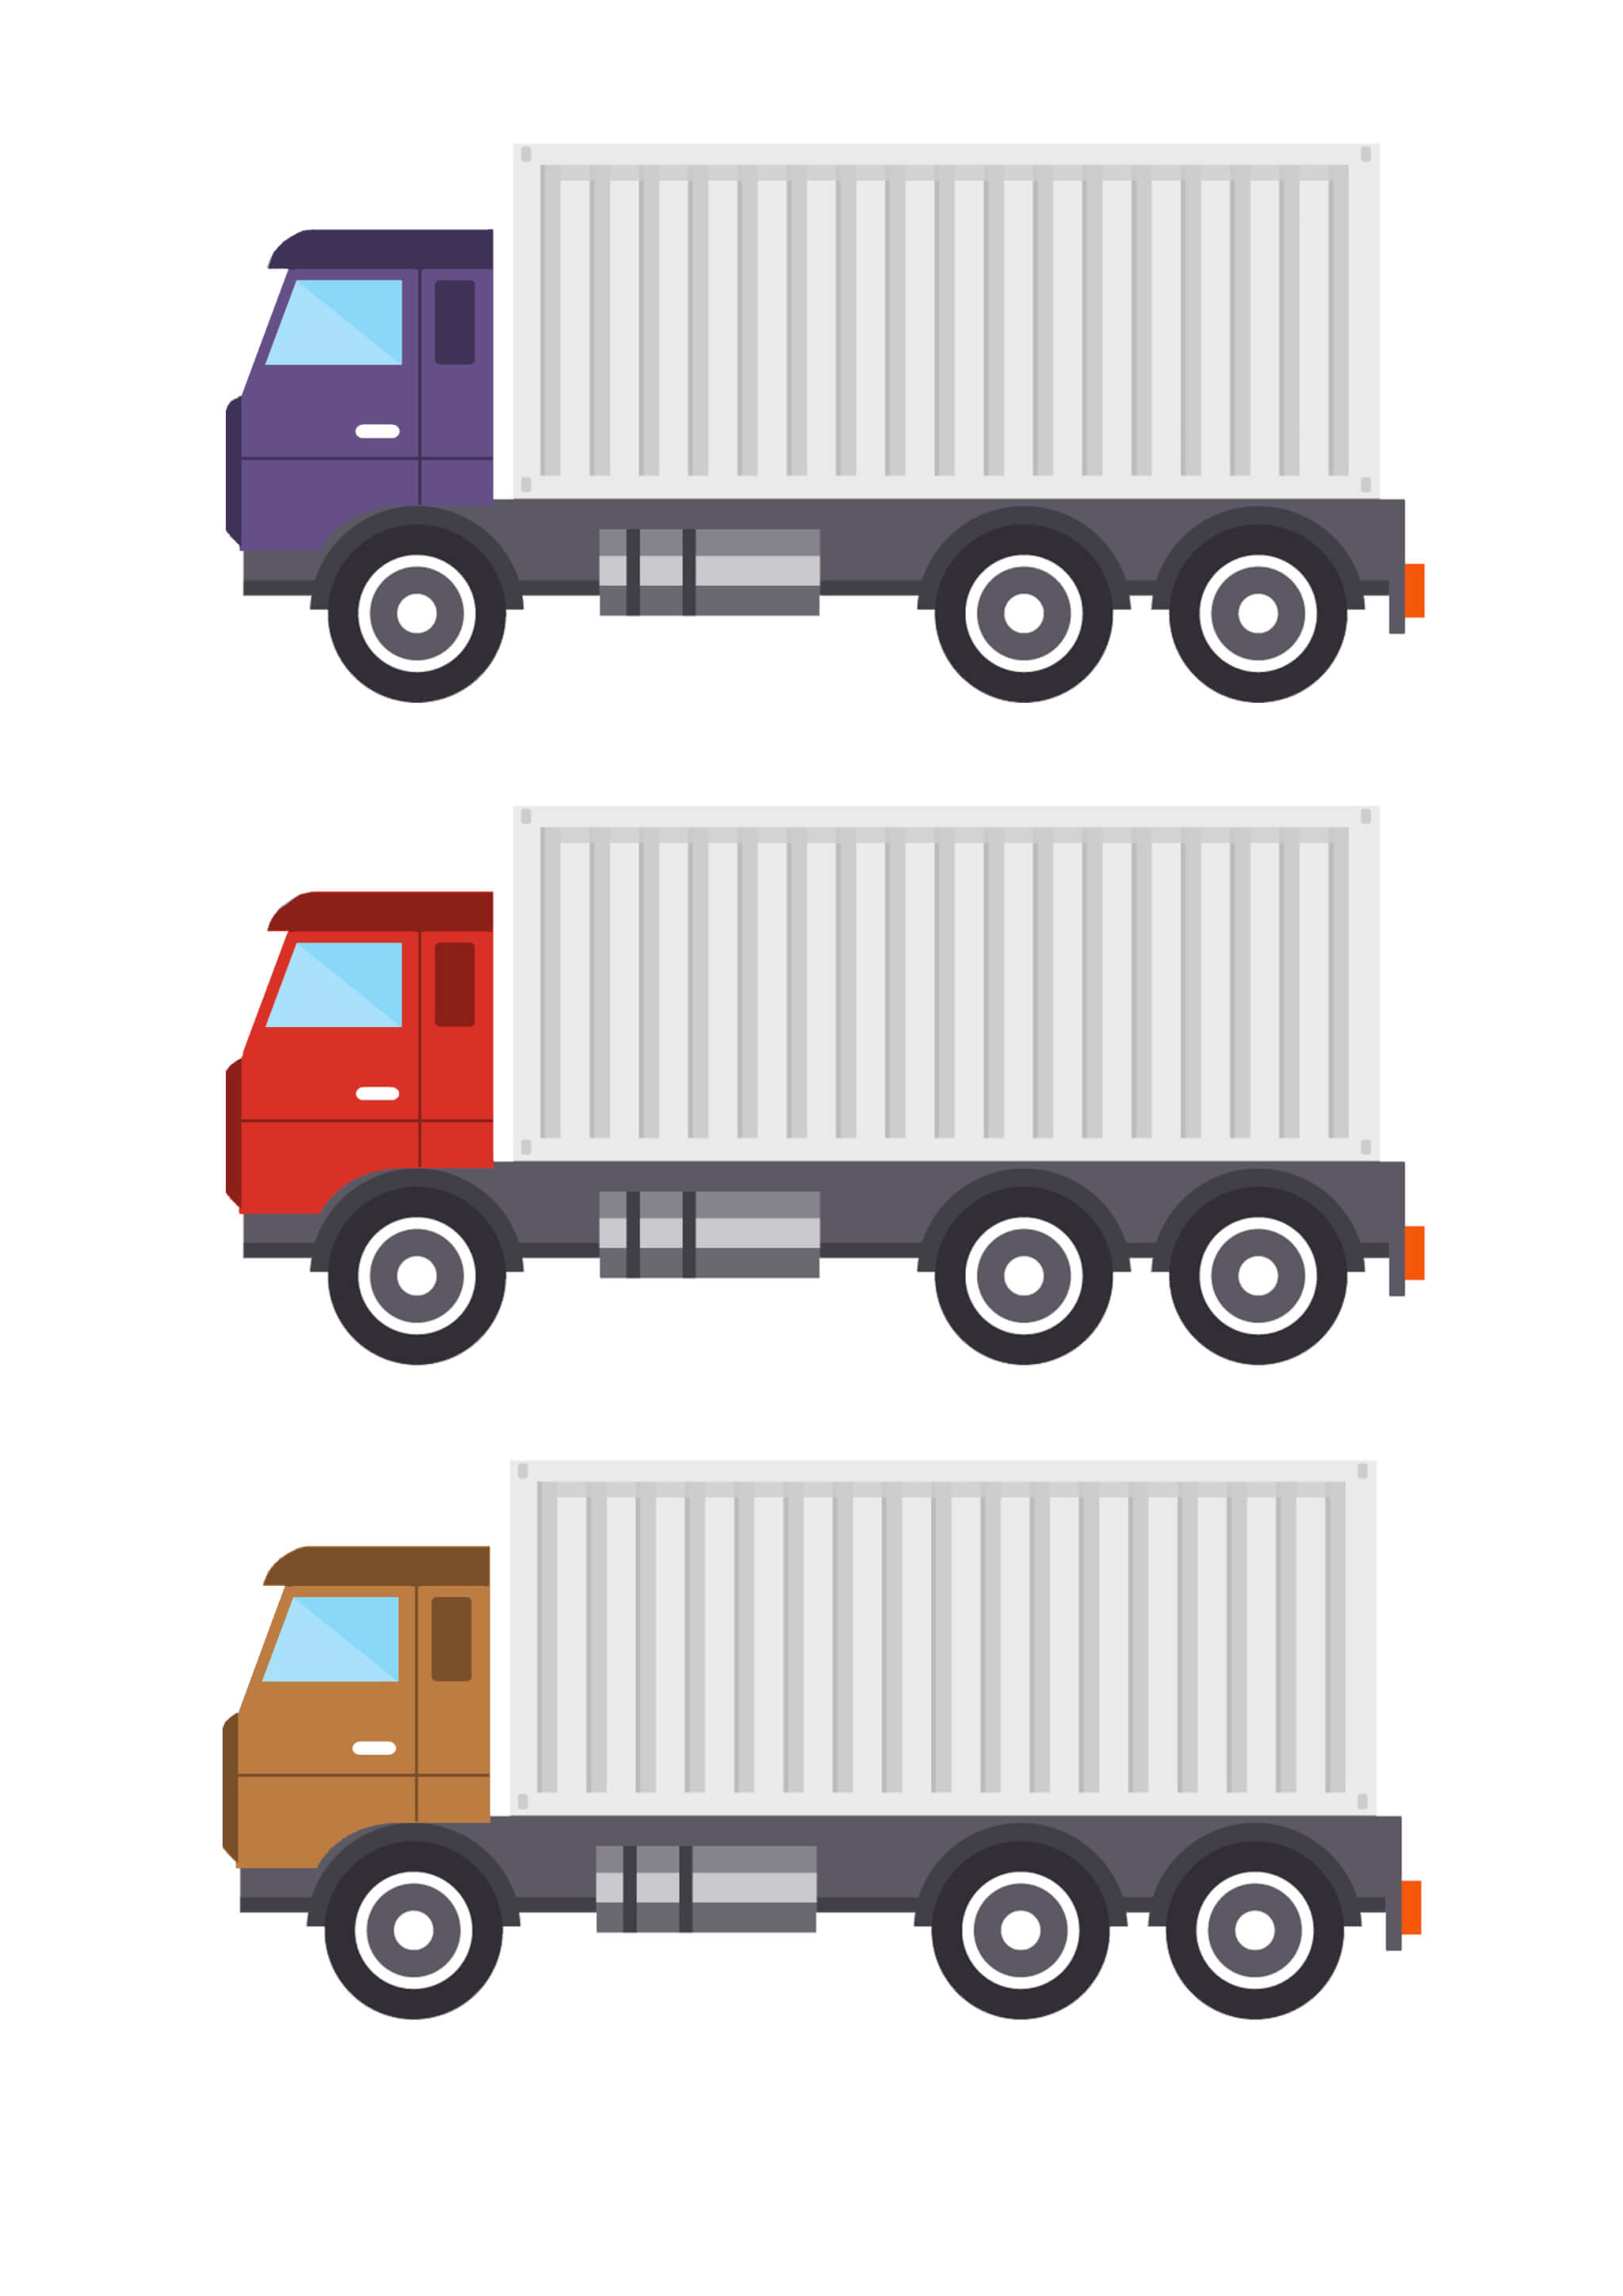 Printable Activity «What is carrying a truck?» - Image 4